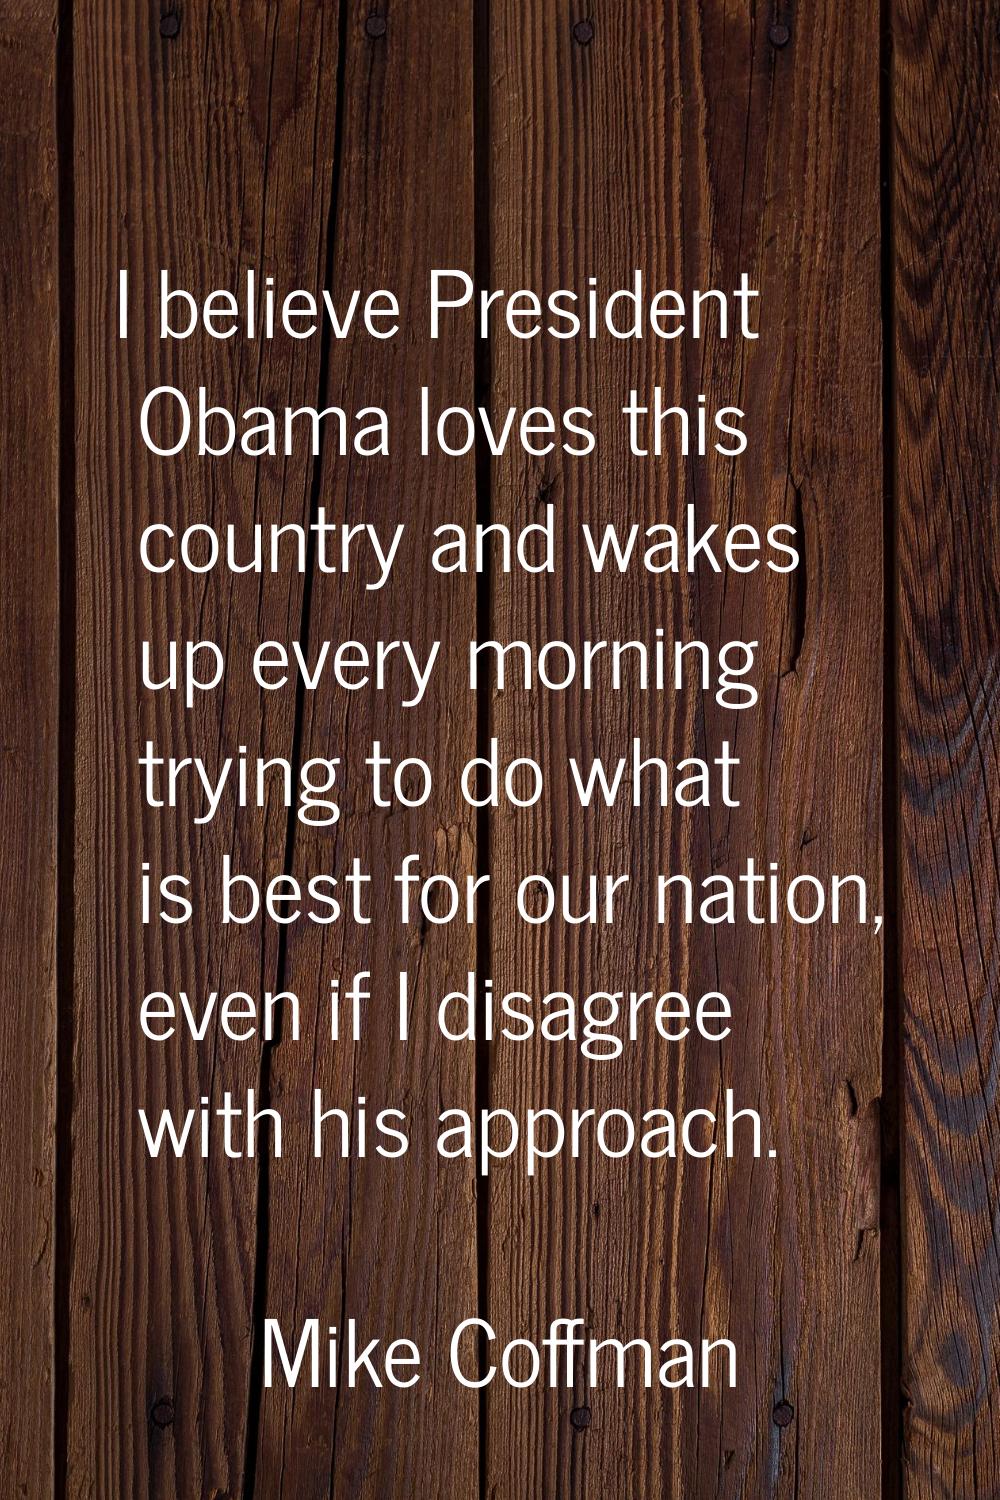 I believe President Obama loves this country and wakes up every morning trying to do what is best f